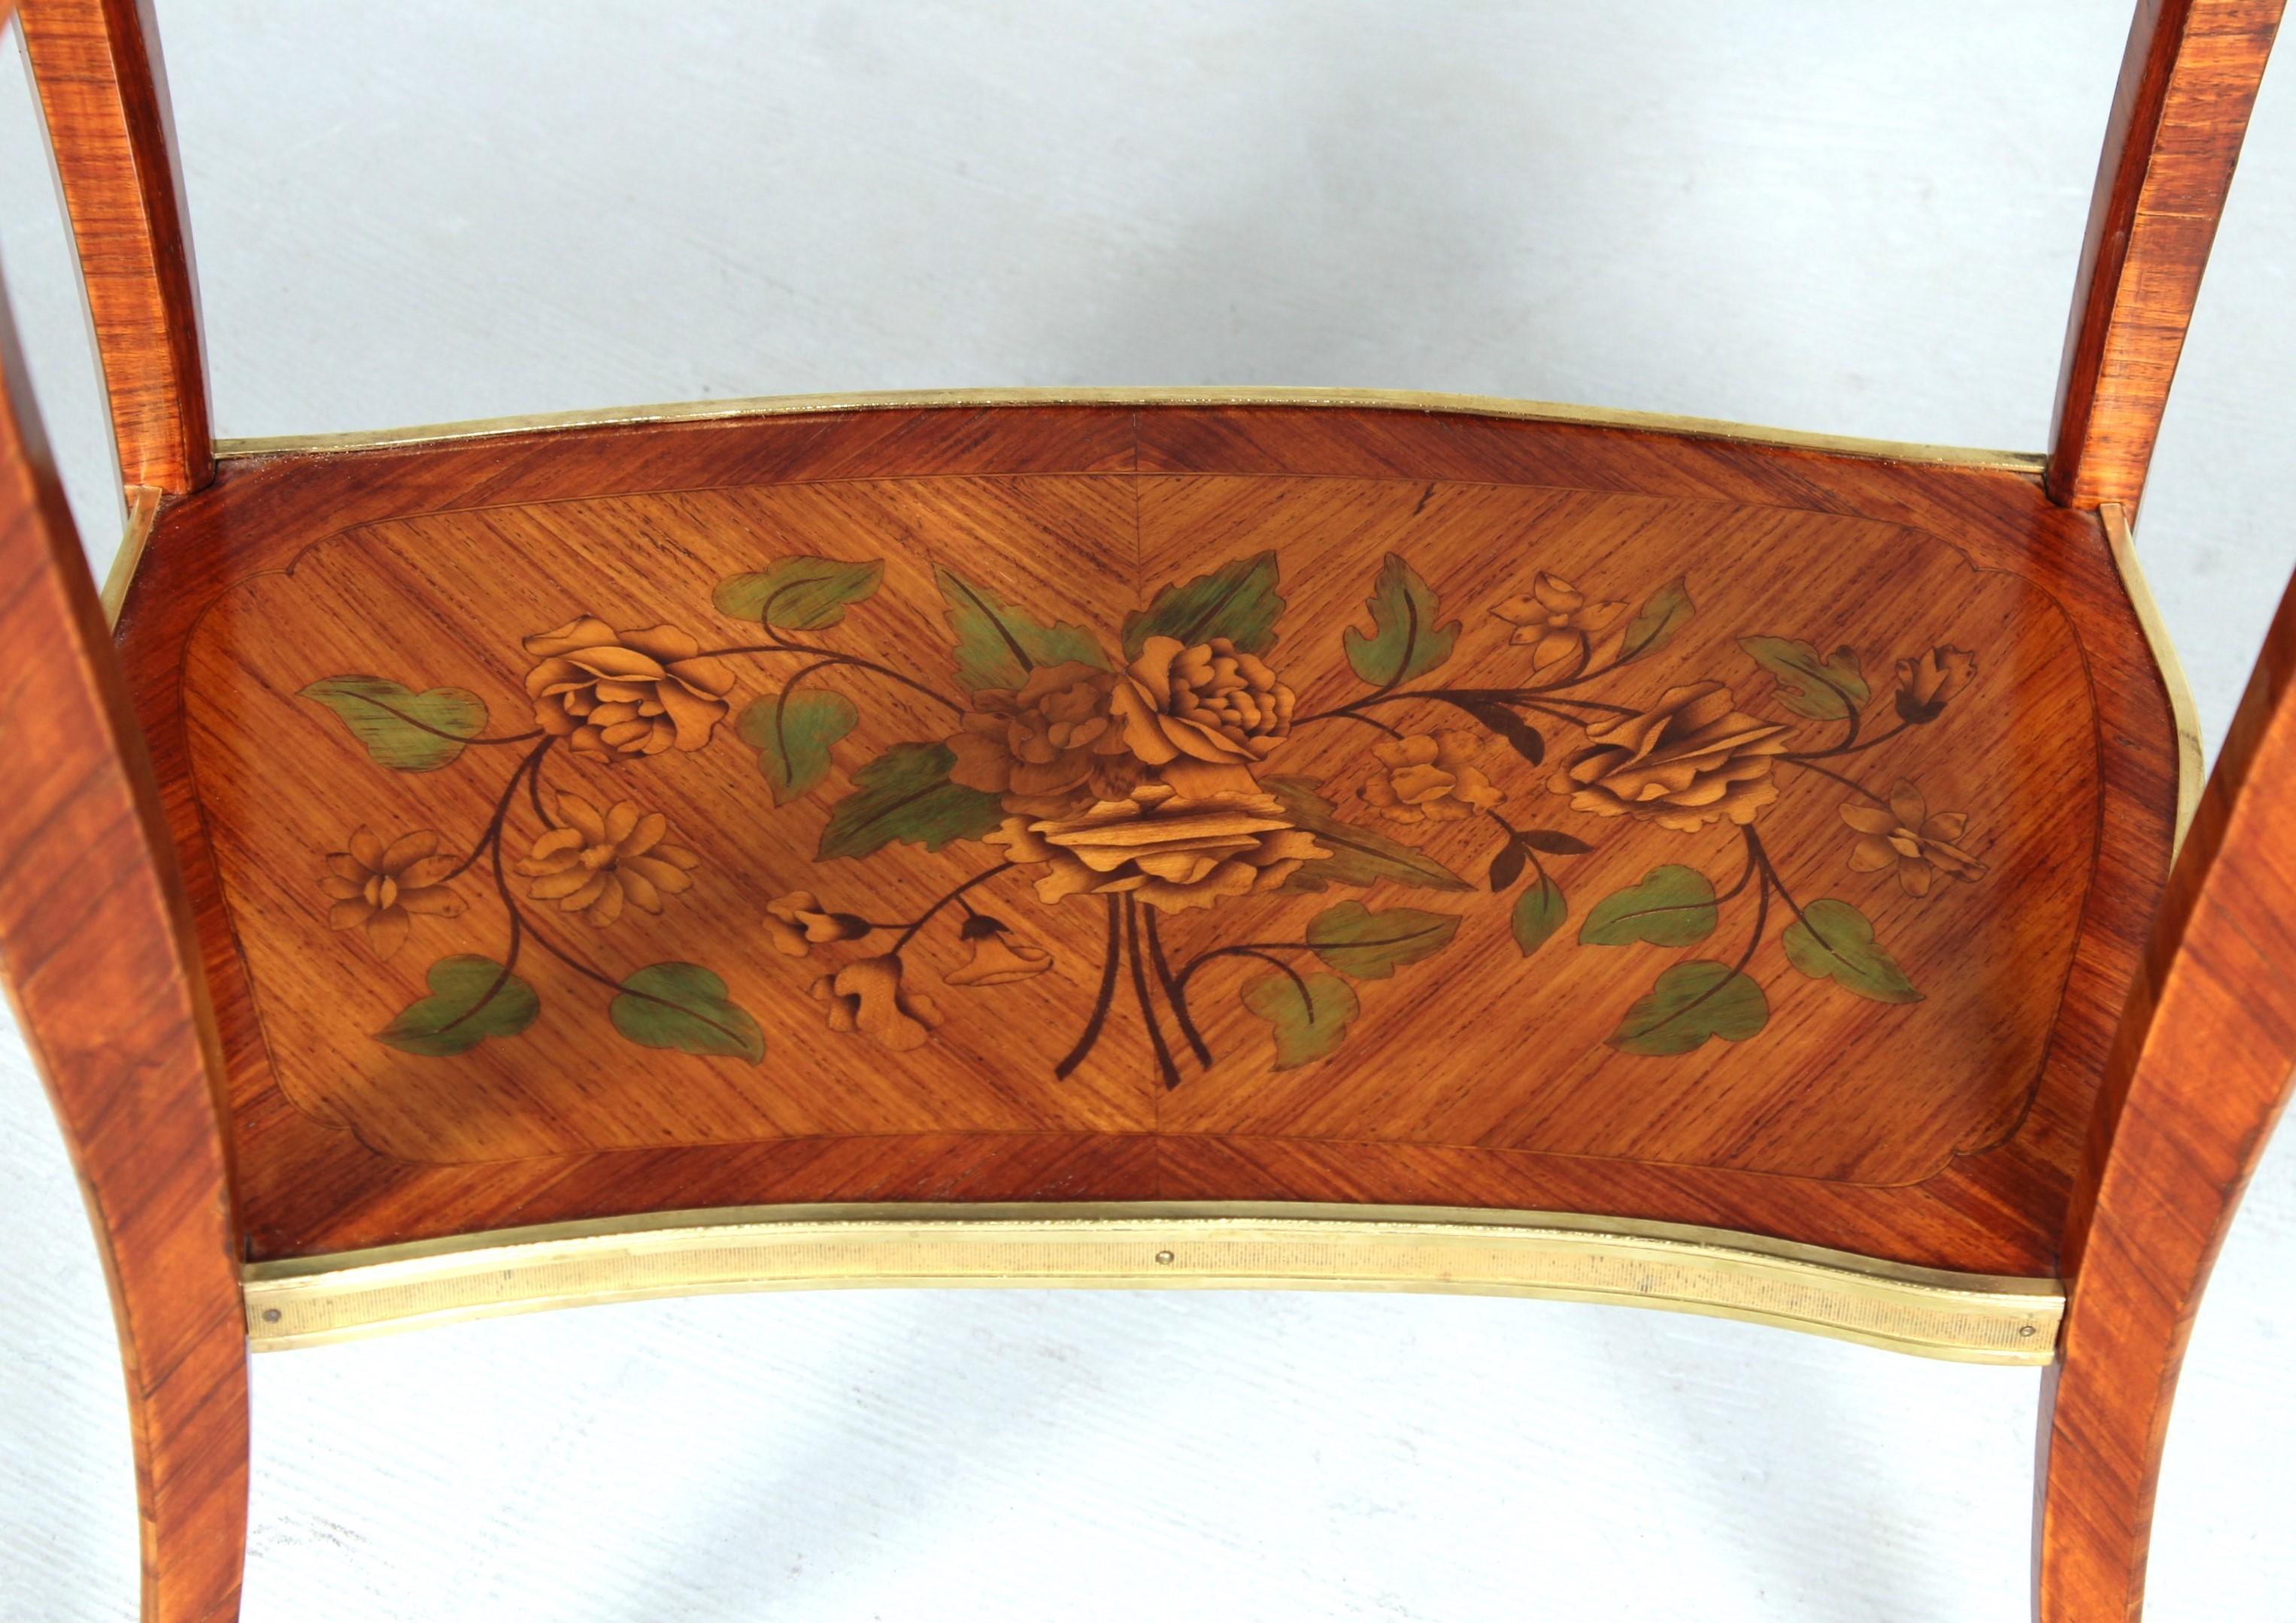  Ladies Desk with Fine Marquetry, Attributed to Beurdeley, Paris, circa 1880 For Sale 11